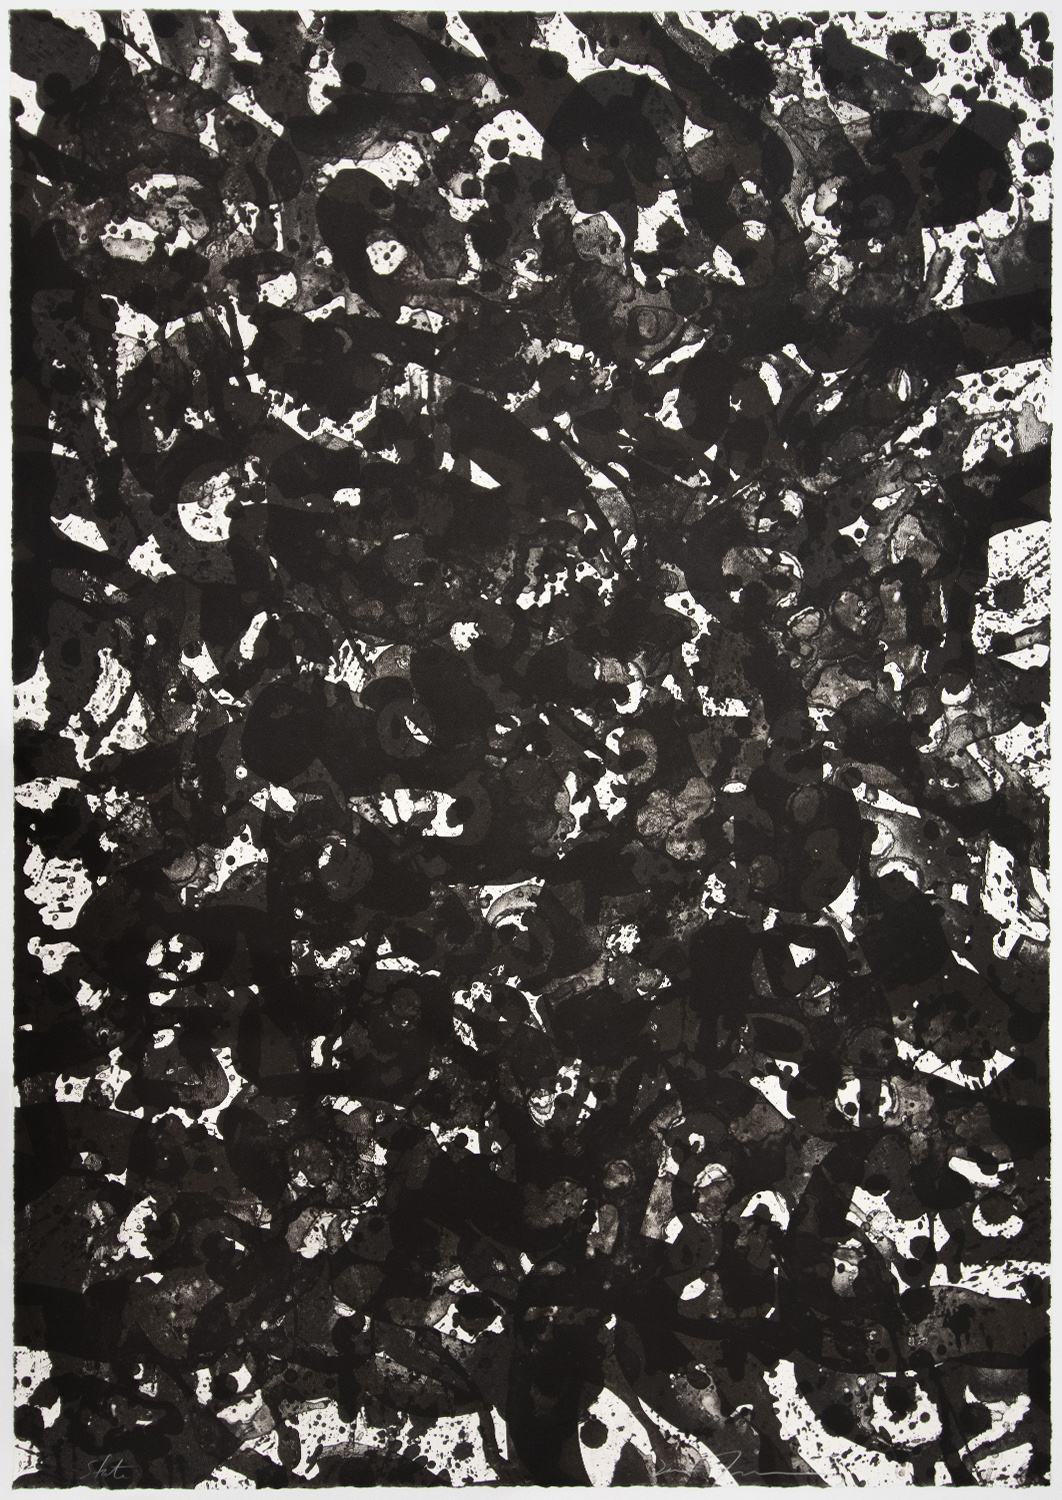 Sam Francis special proof of abstraction in heavy black ink